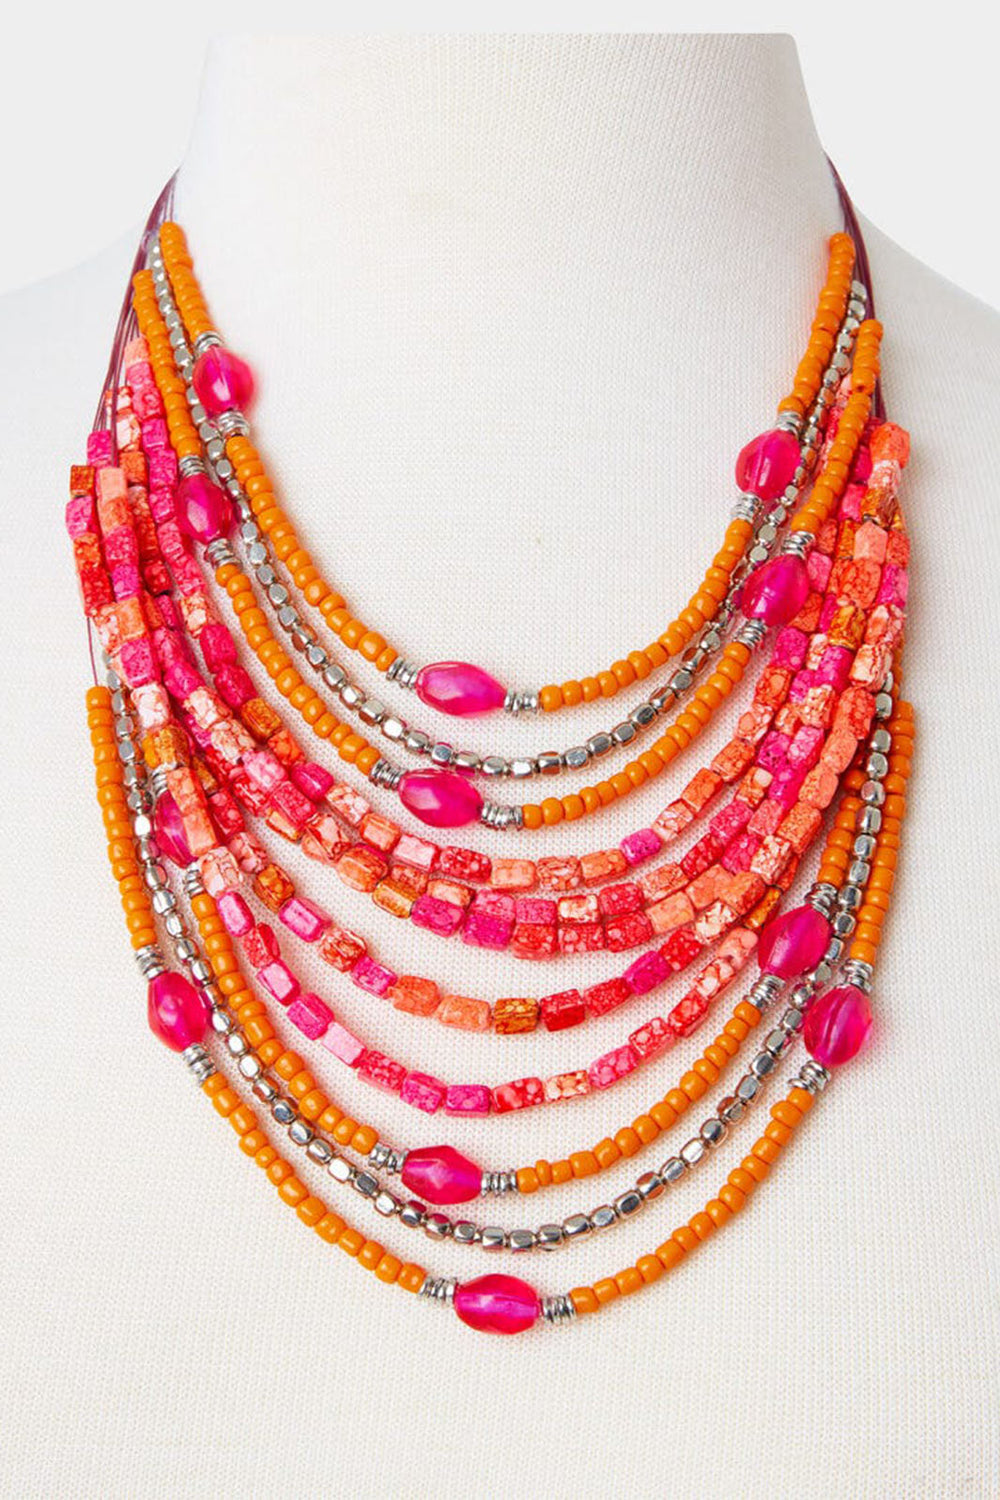 Joe Browns BJ941 Pink Island Hopper Beaded Necklace - Experience Boutique